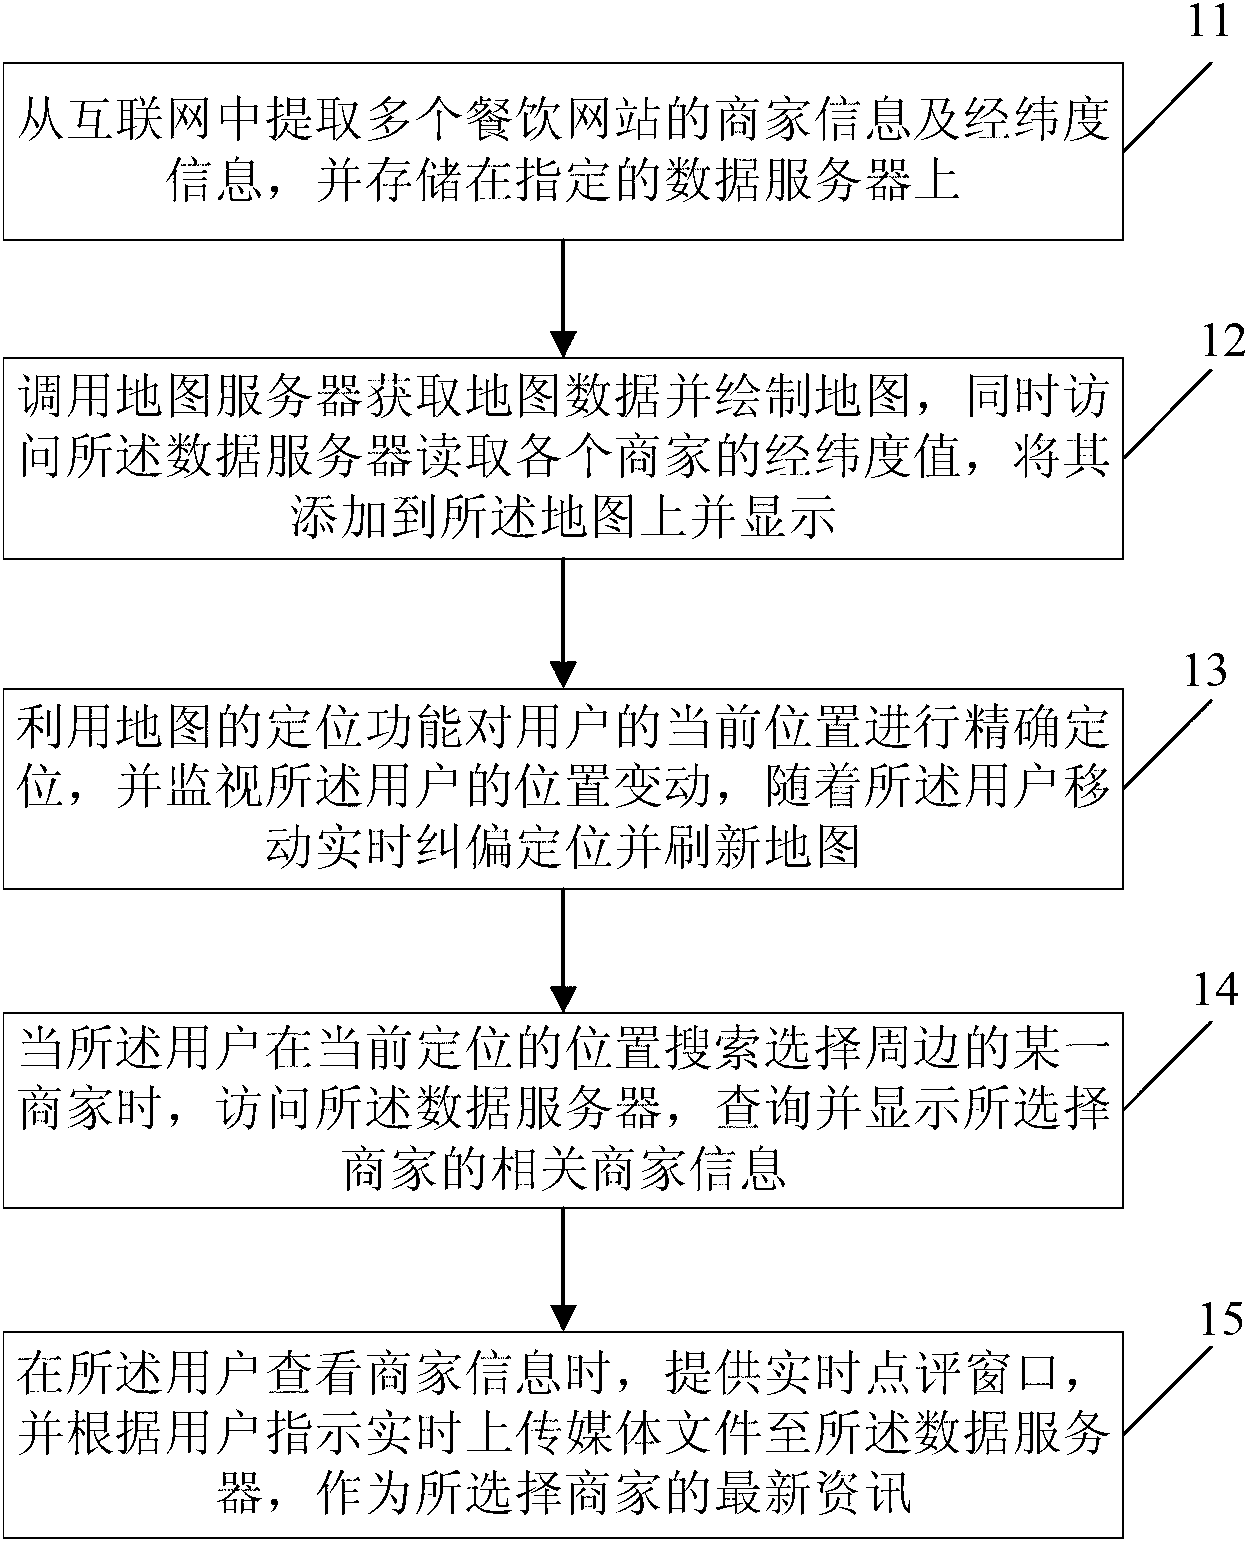 Method and system for aggregate search and interaction of restaurant information based on location service